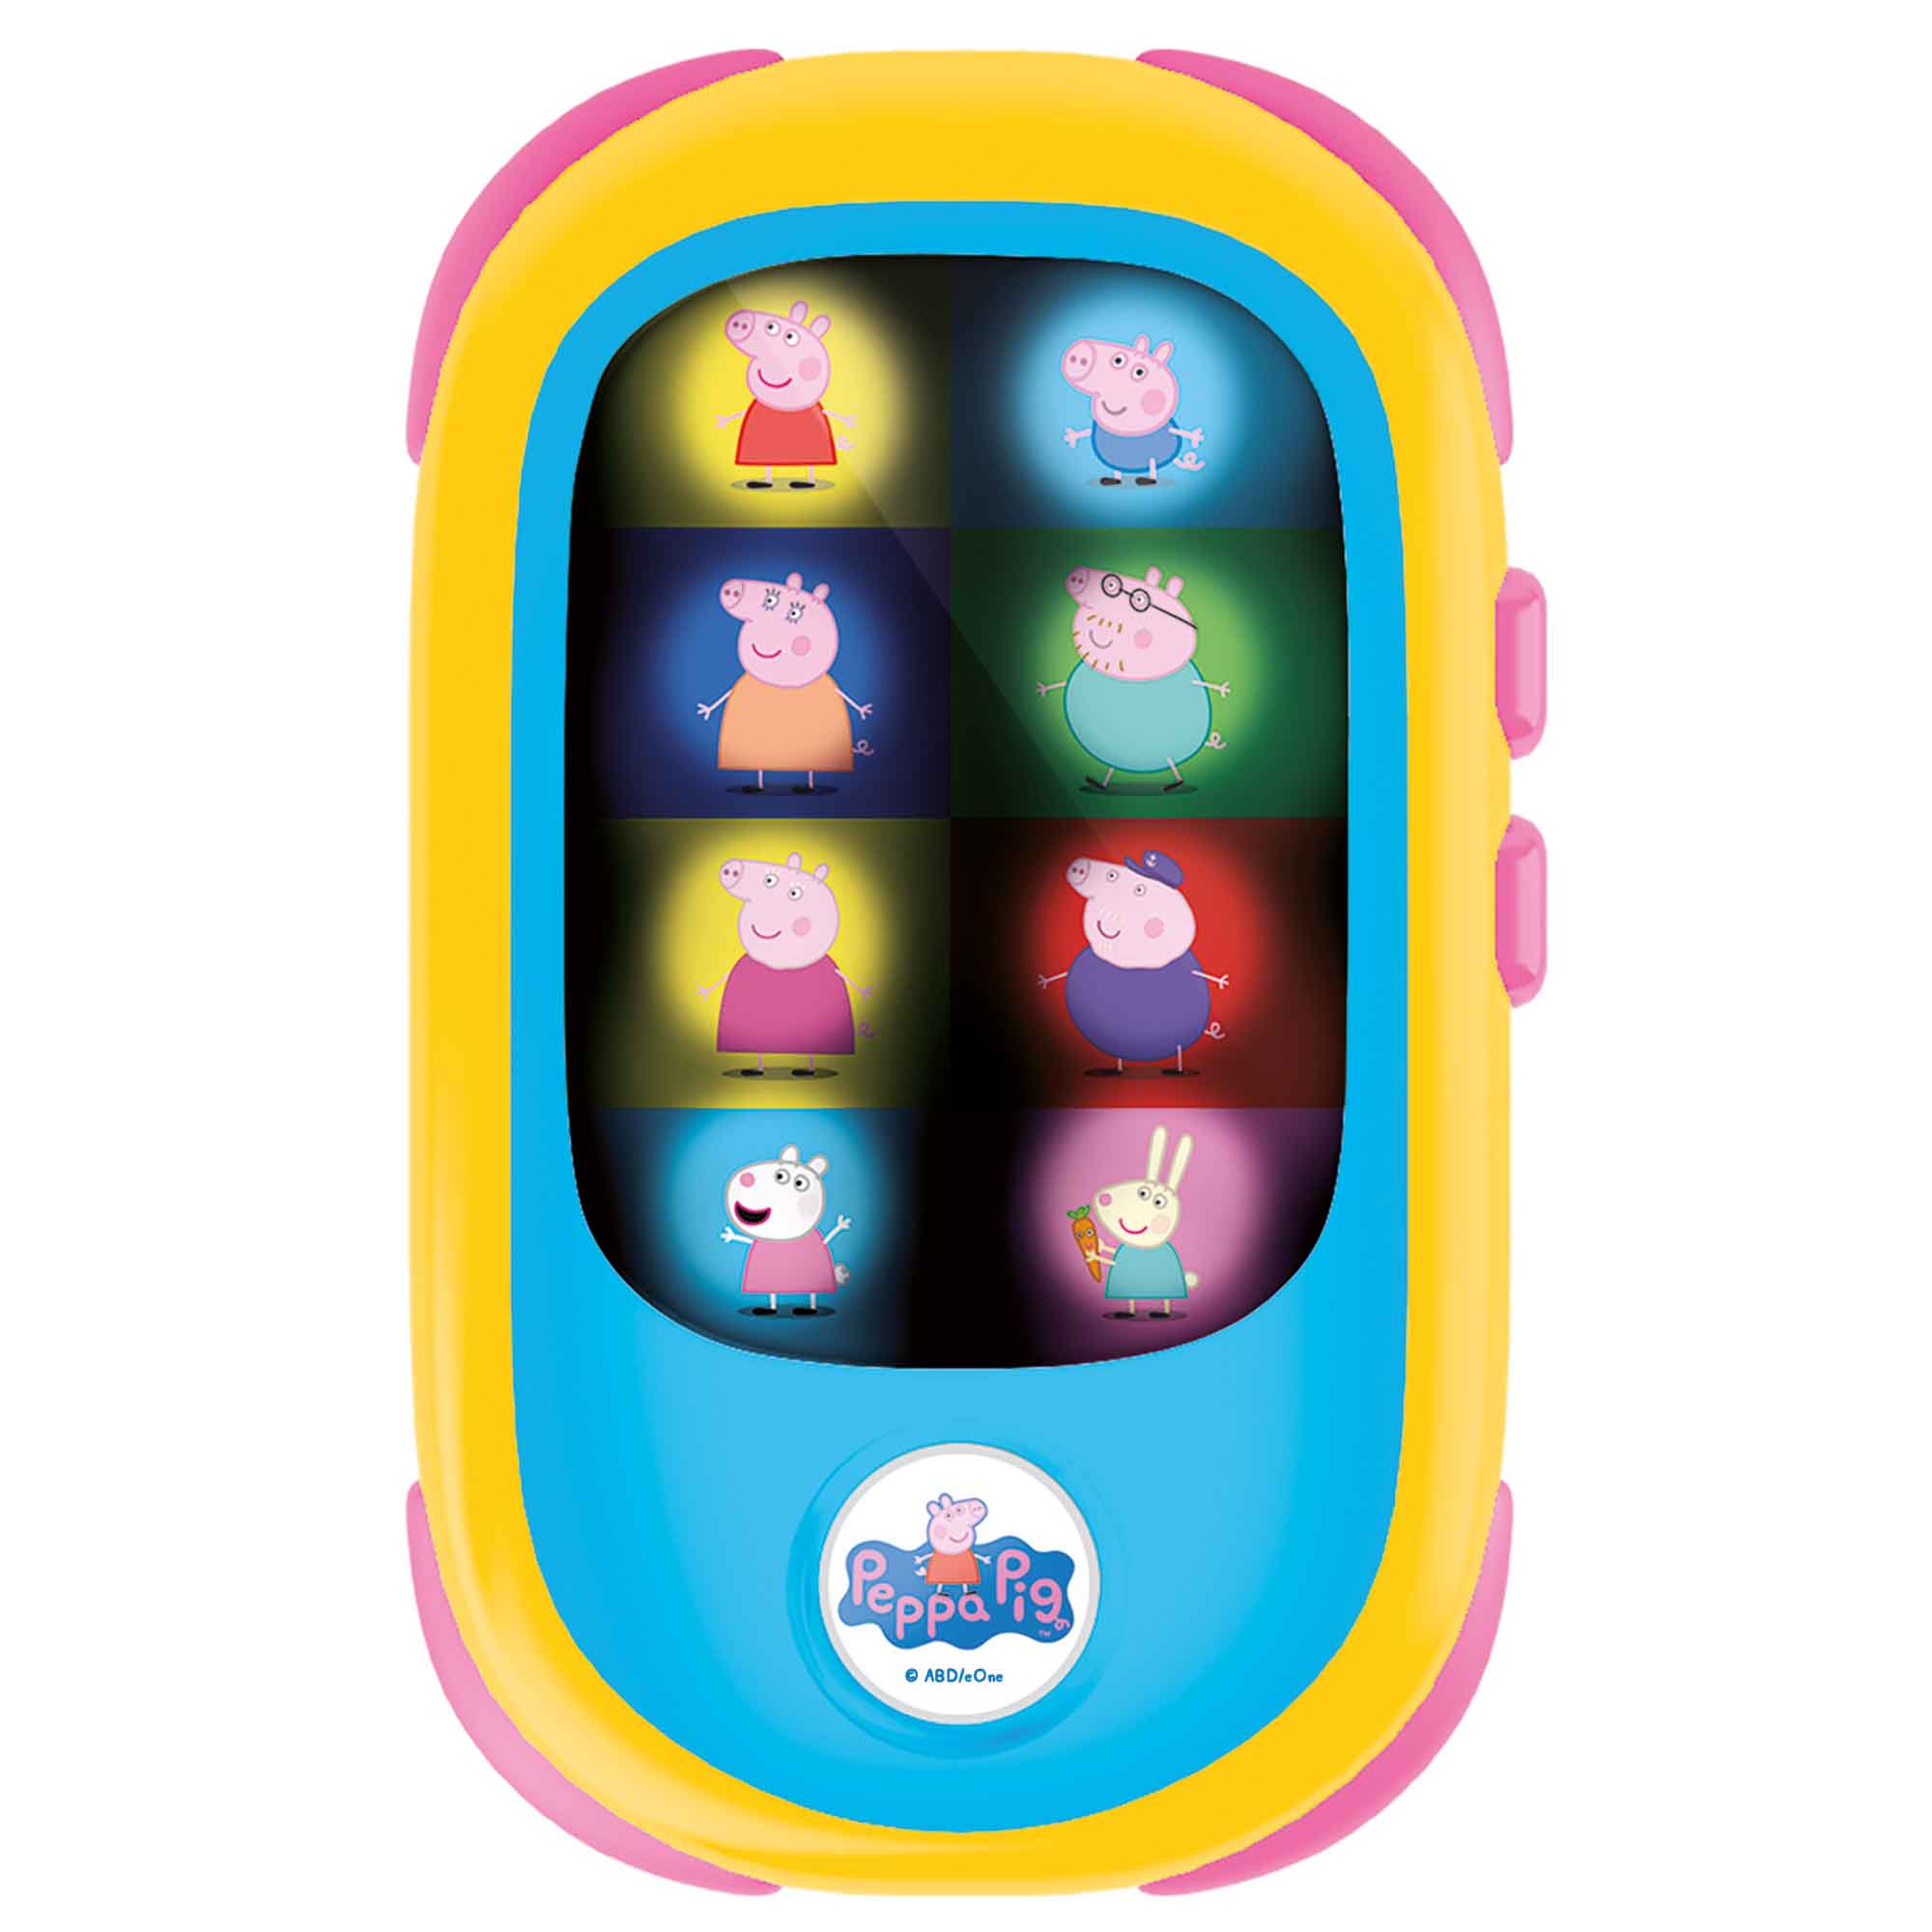 Photo 2 of the game PEPPA PIG BABY SMARTPHONE